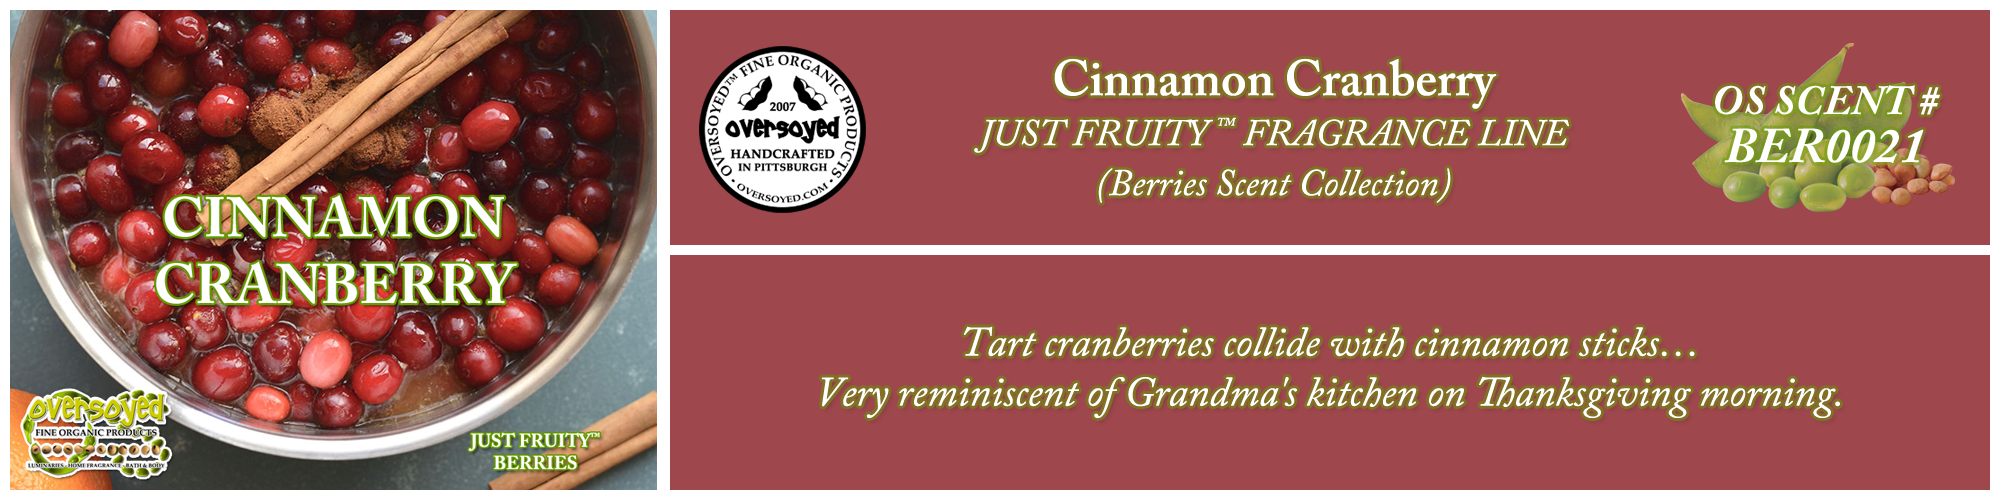 Cinnamon Cranberry Handcrafted Products Collection